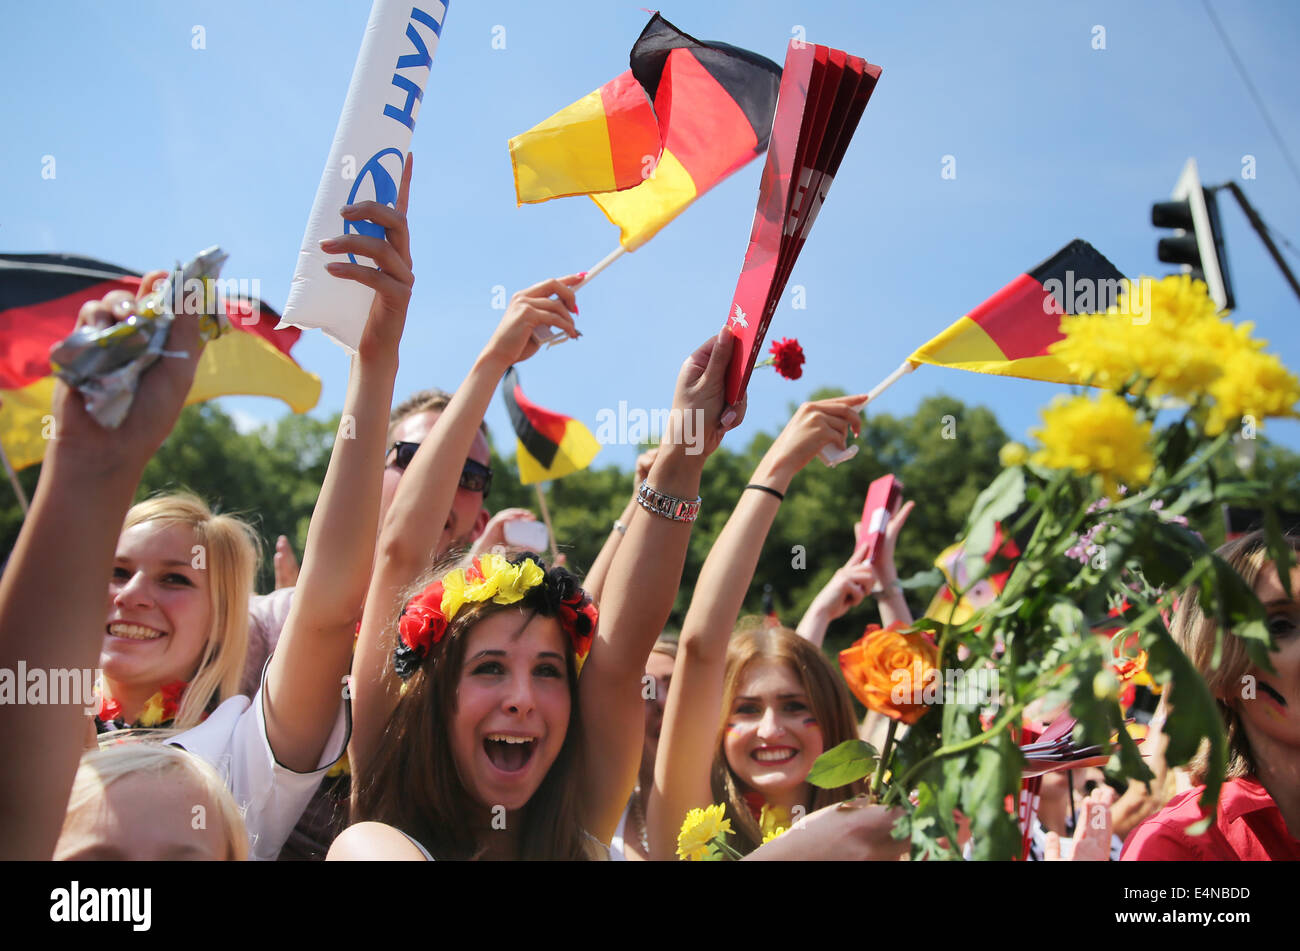 Berlin, Germany. 15th July, 2014. Fans of the German national soccer team celebrate before the reception of the national team at the so-called 'Fan Meile' at Brandenburg Gate in Berlin, Germany, 15 July 2014. The German team on 13 July 2014 had won the Brazil 2014 FIFA Soccer World Cup final against Argentina by 1-0 to win the title for the fourth time after 1954, 1974 and 1990. /Alamy Live News Stock Photo